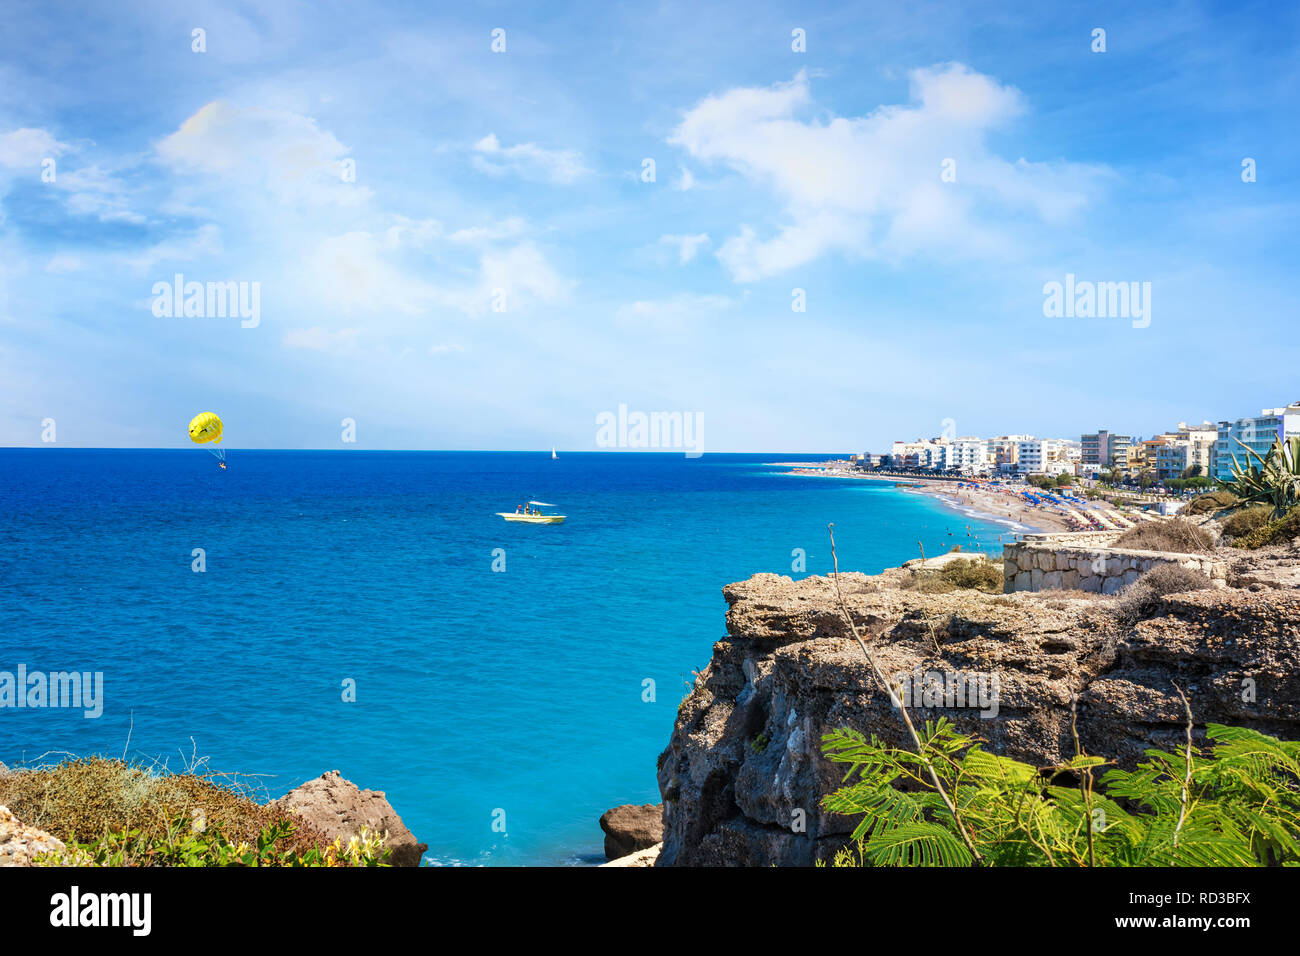 Parasailing in Aegean Sea in city of Rhodes (Rhodes, Greece) Stock Photo